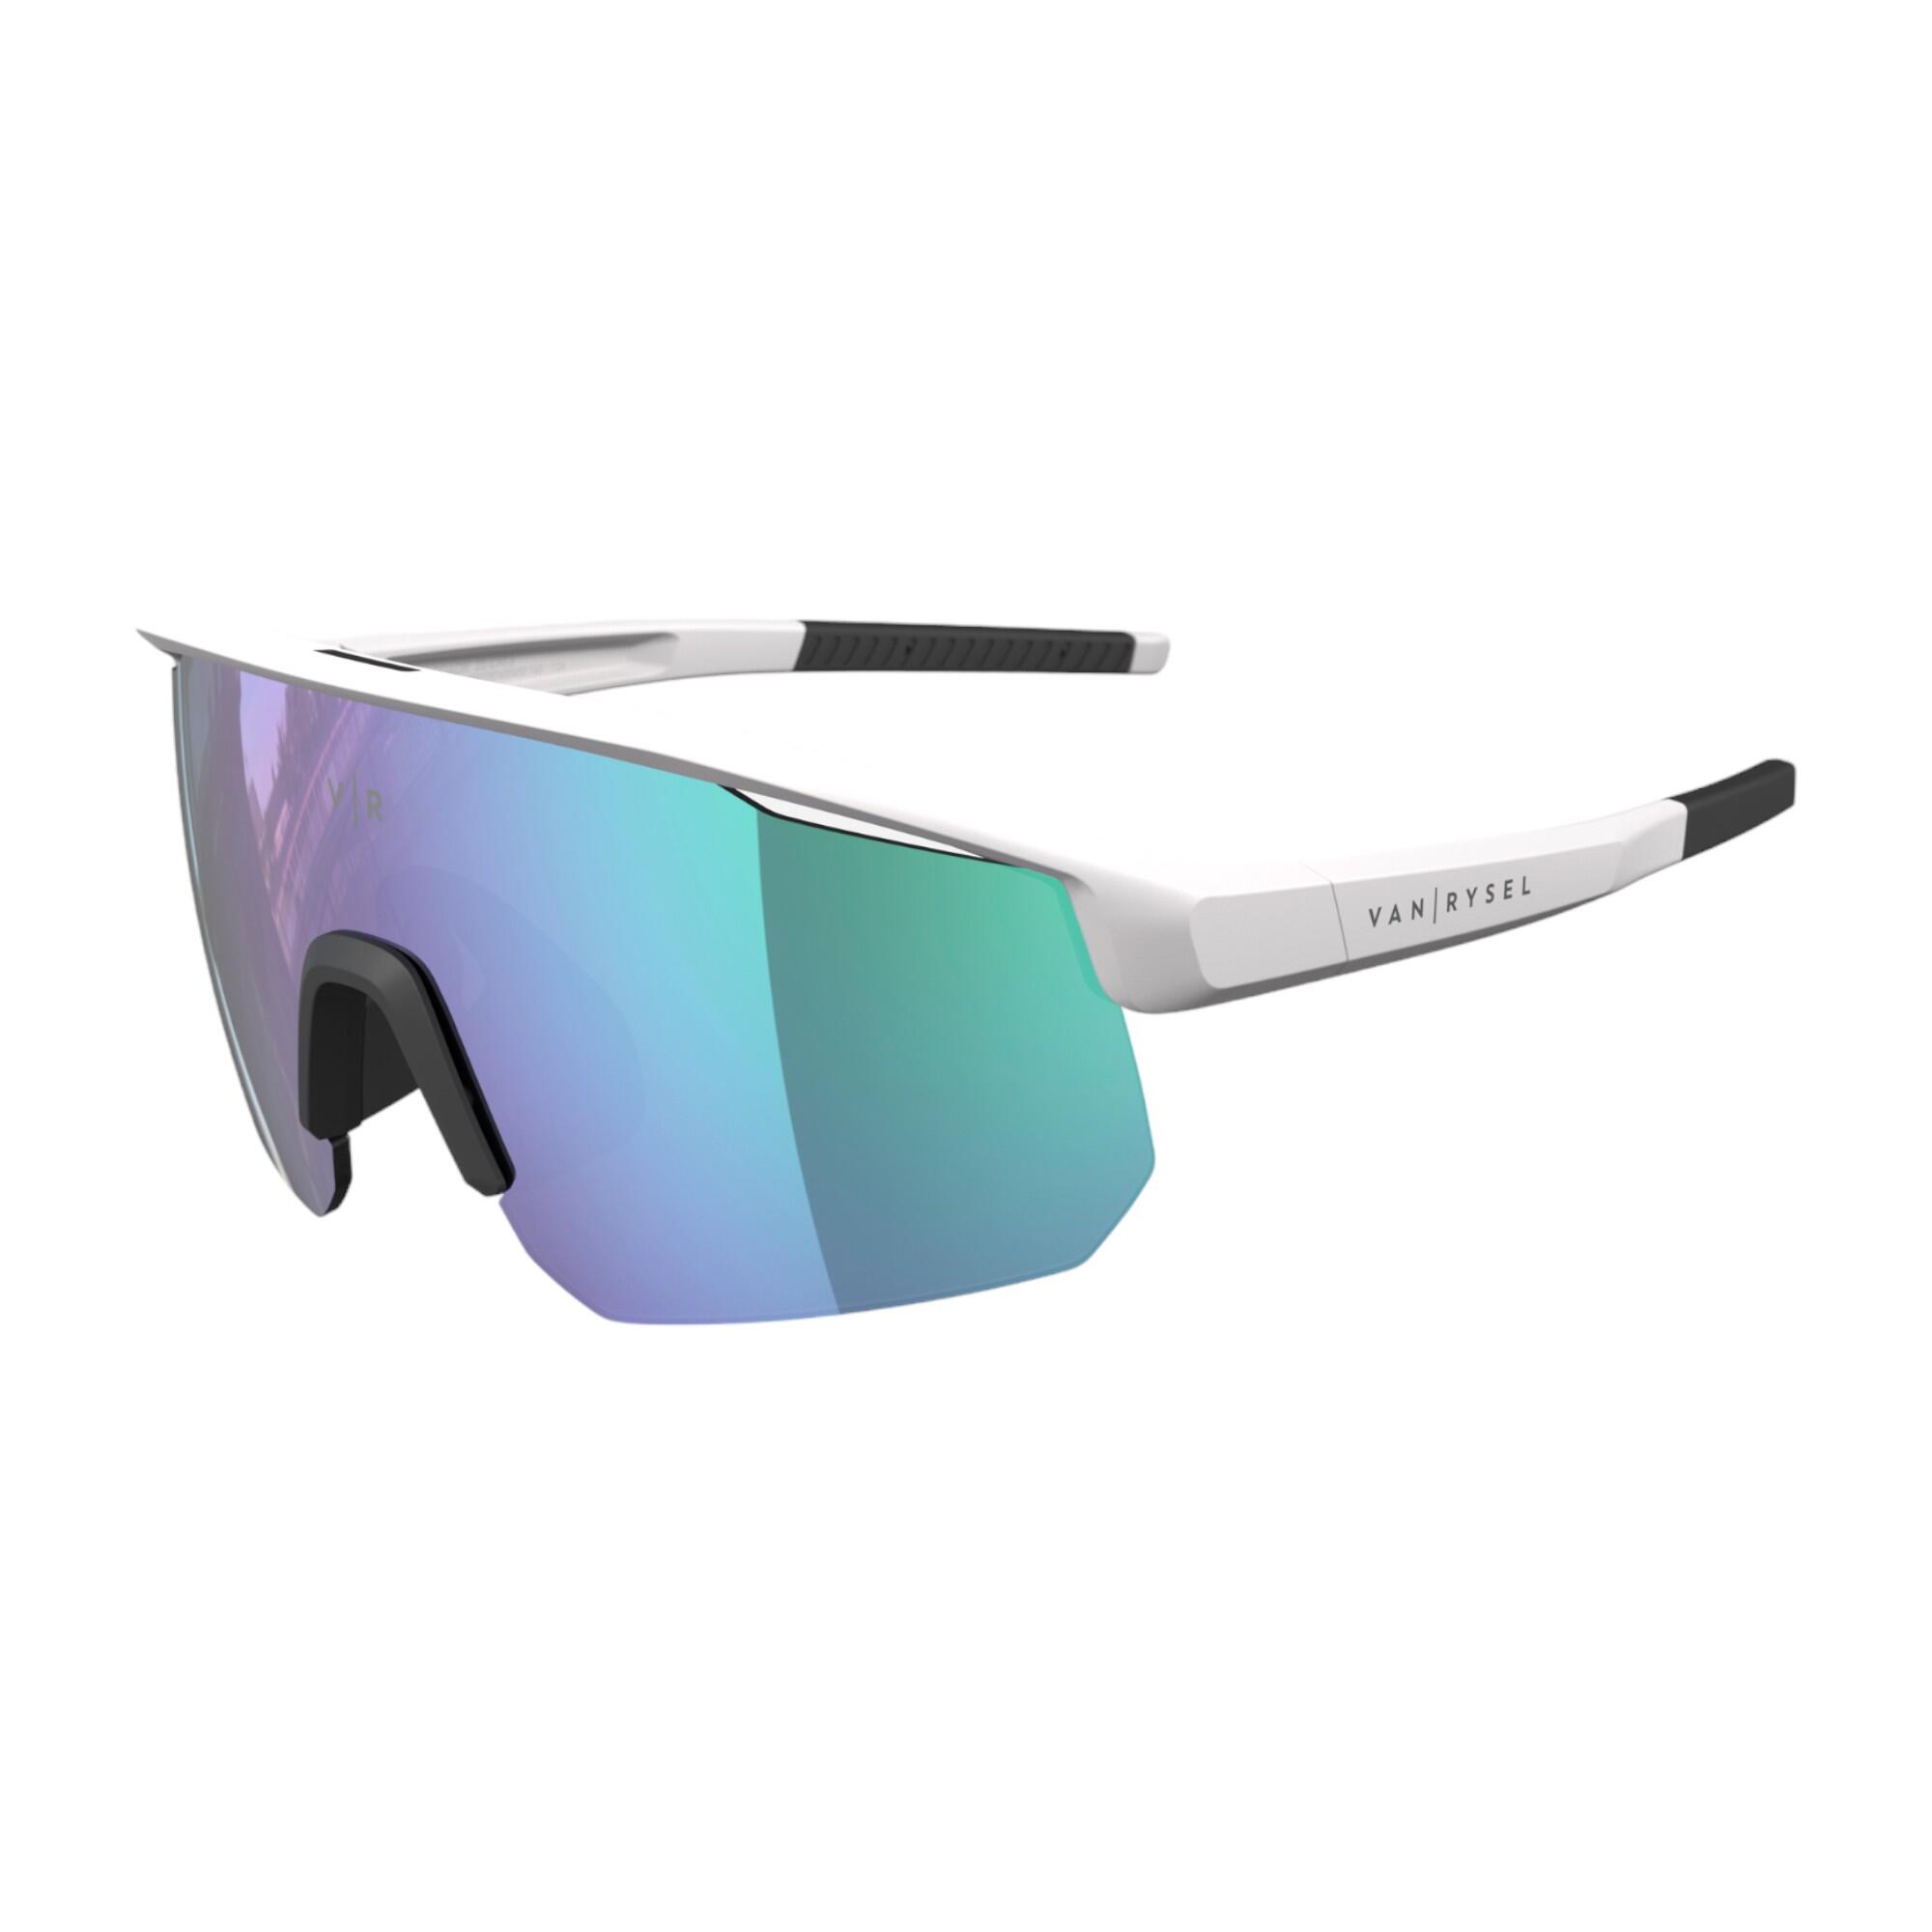 Cycling Glasses and Sunglasses